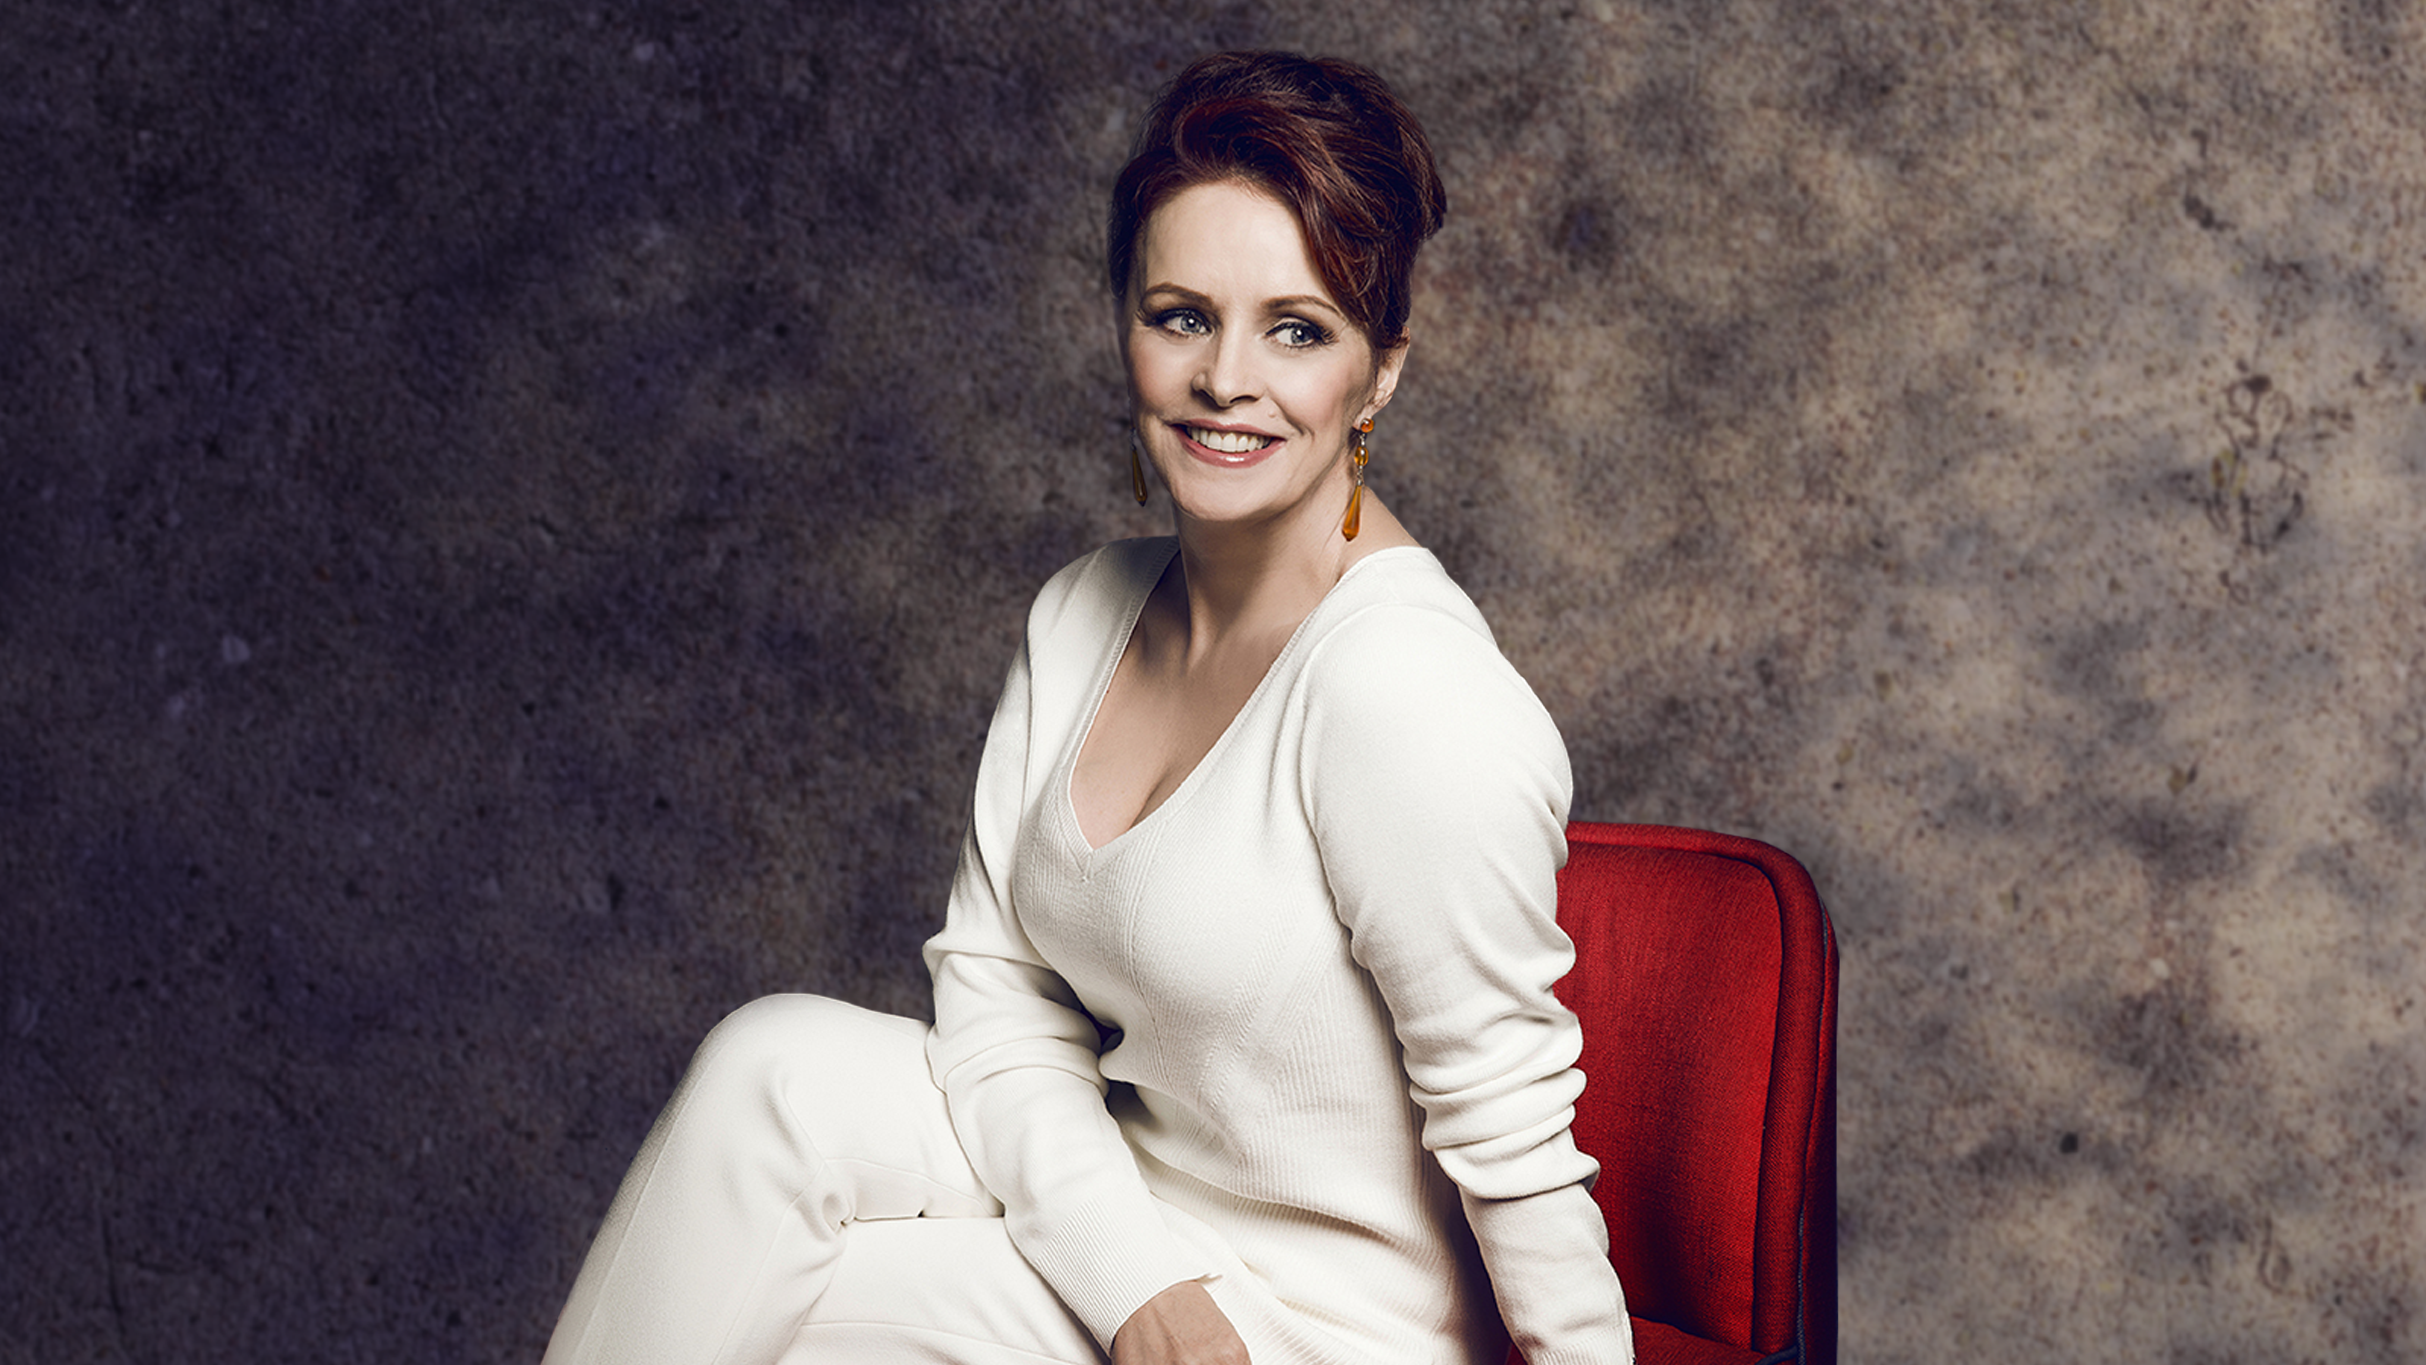 Sheena Easton in Niagara Falls promo photo for Official Platinum Onsale presale offer code